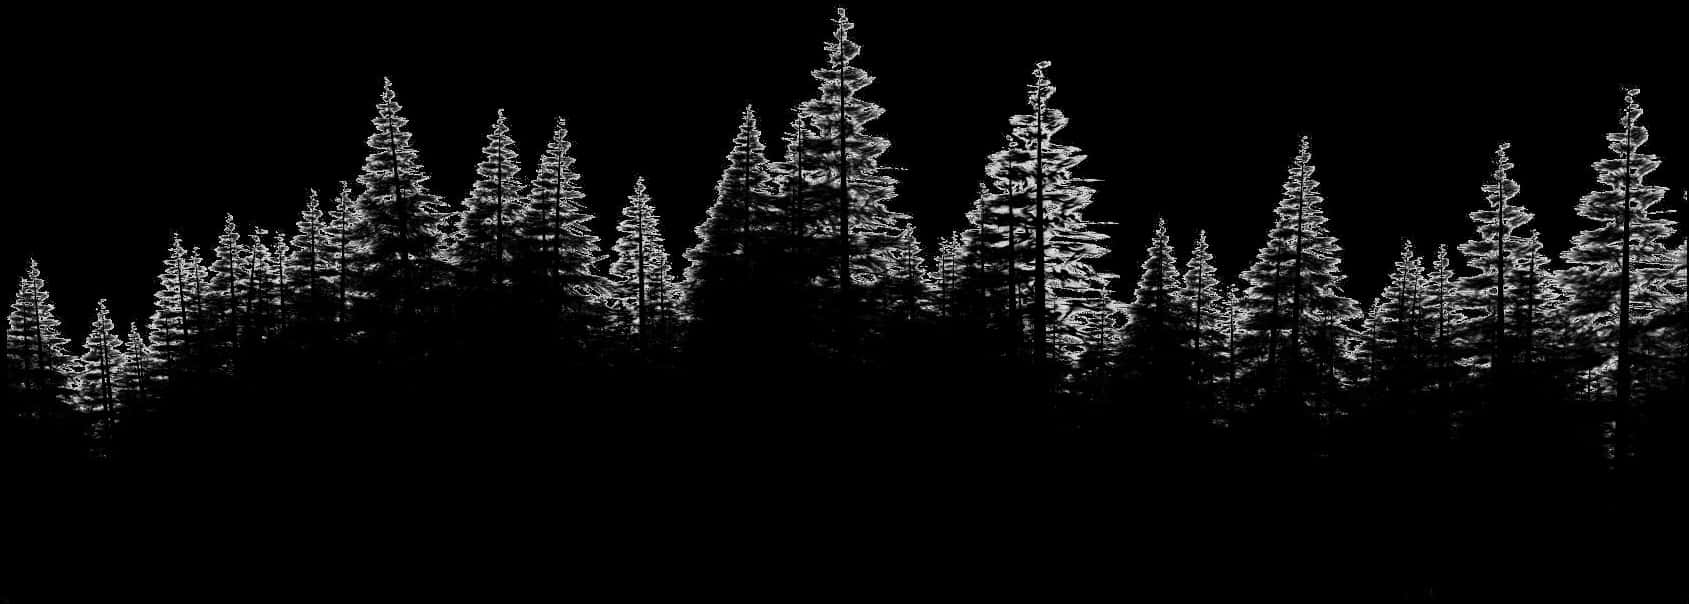 A Group Of Trees In The Dark